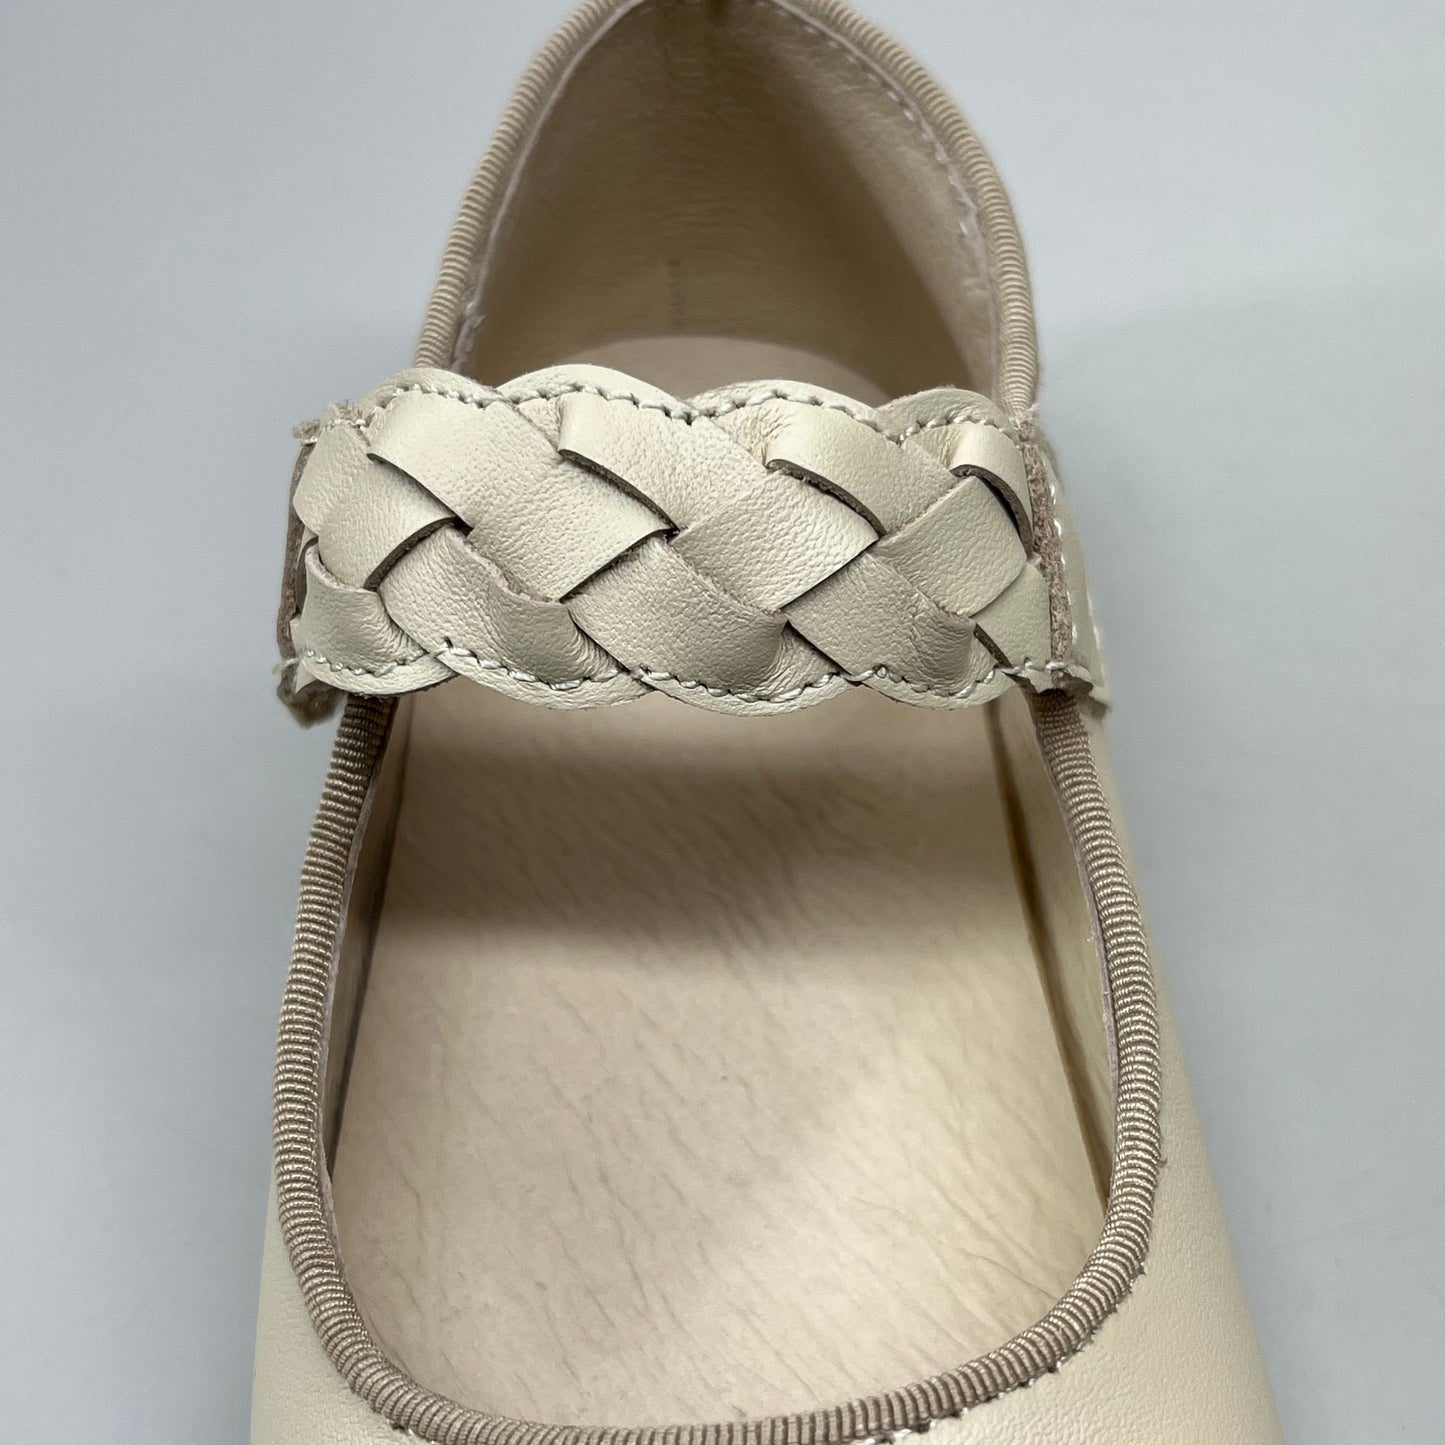 OLD SOLES Lady Plat Braided Strap Leather Shoe Kid’s Sz 26 US 9.5 Cream #817